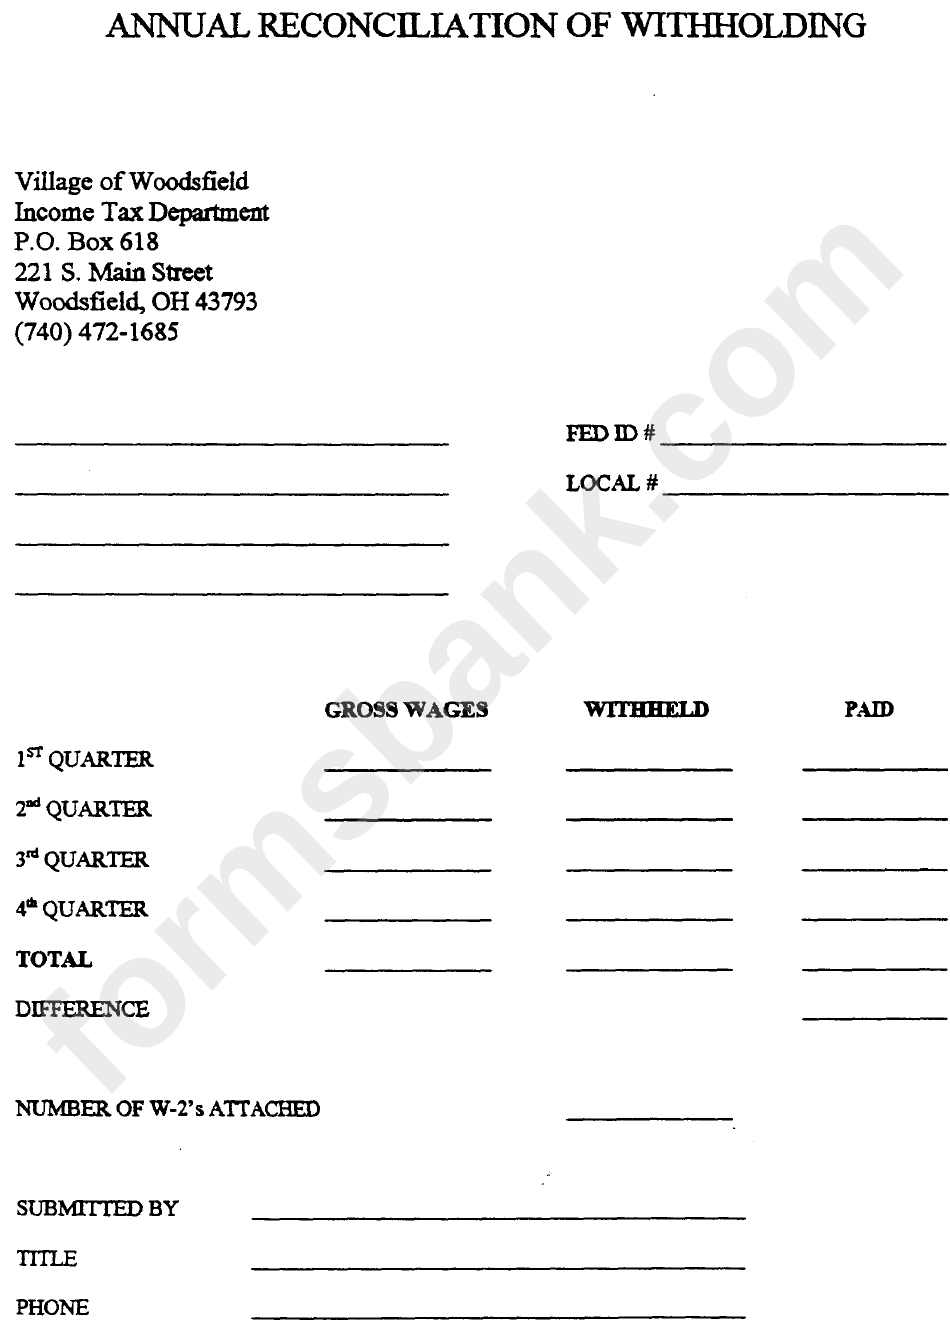 annual-reconciliation-form-of-withholding-state-of-ohio-printable-pdf